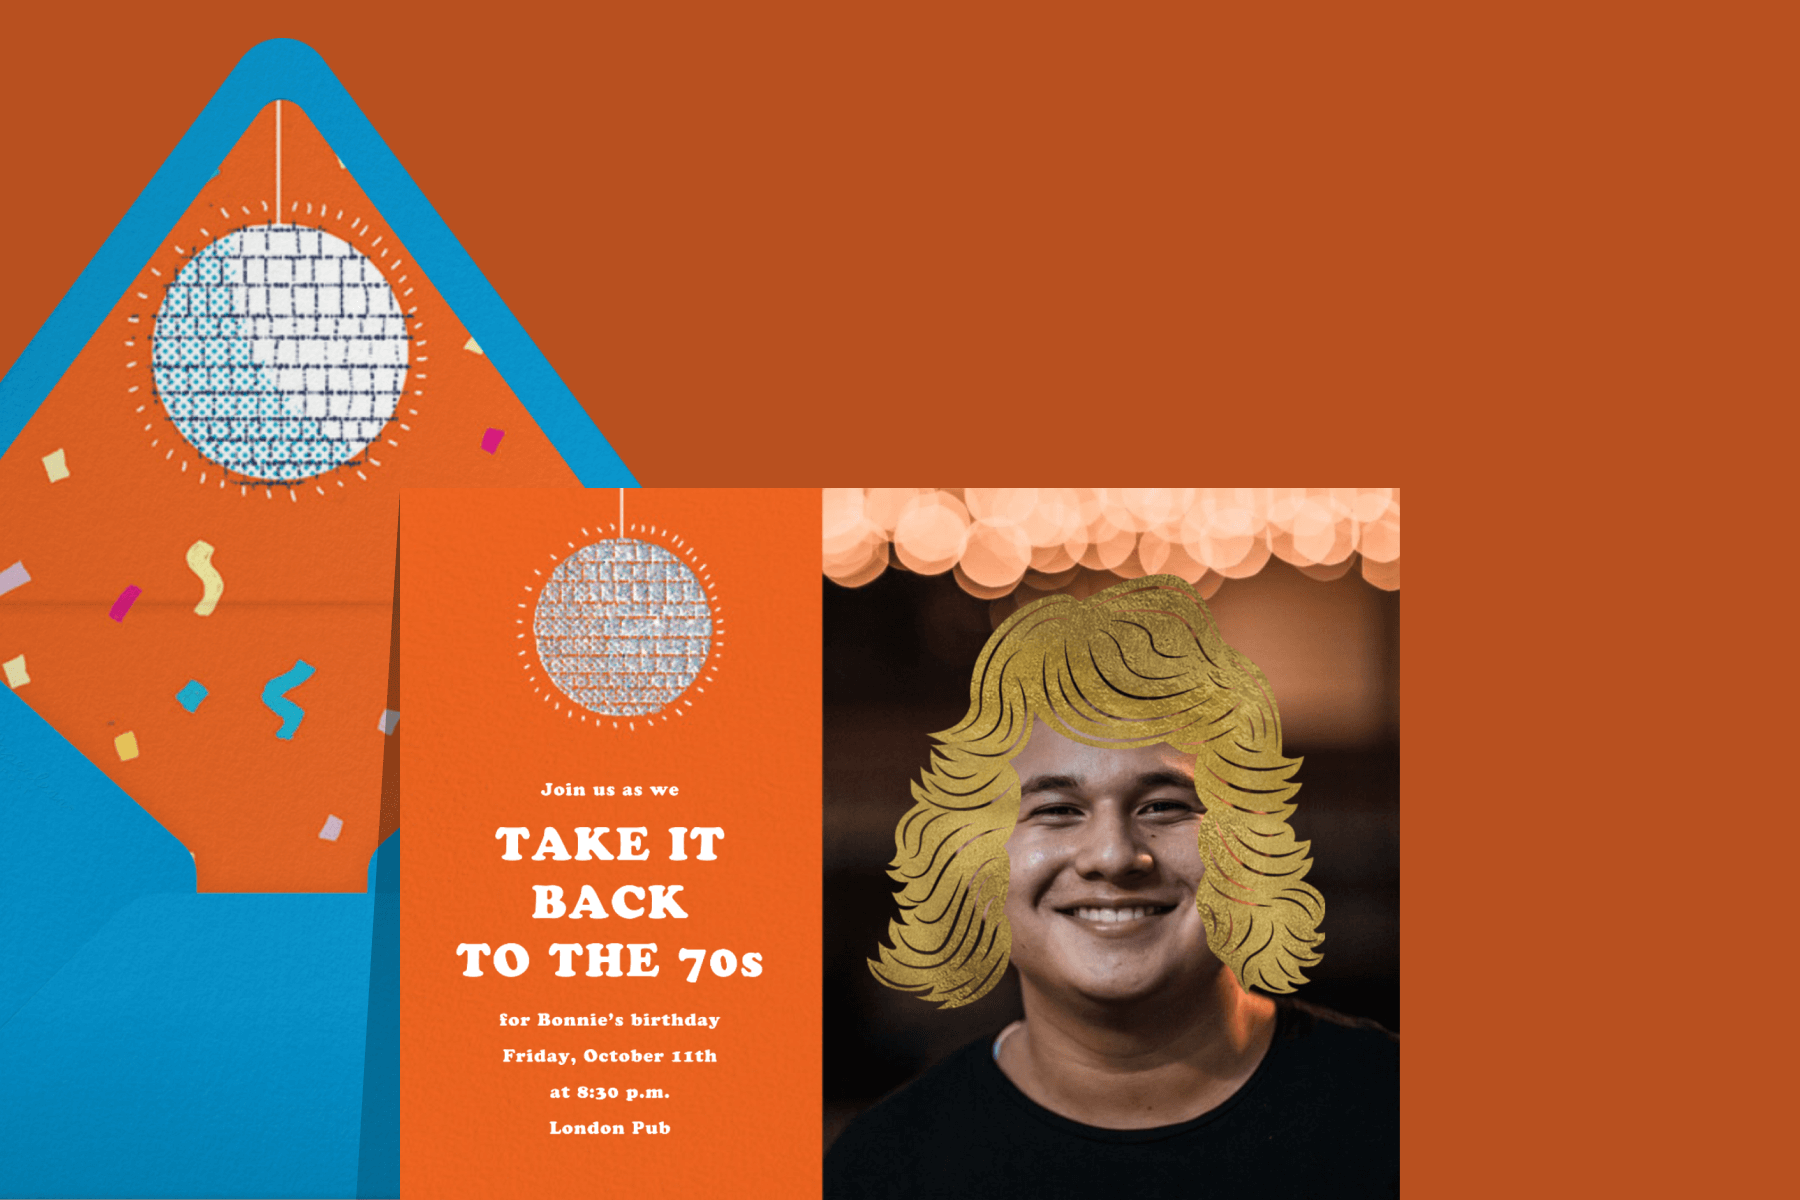 A party invitation with a disco ball and a picture of a man and a golf foil illustration of a feathered hairstyle superimposed on top.